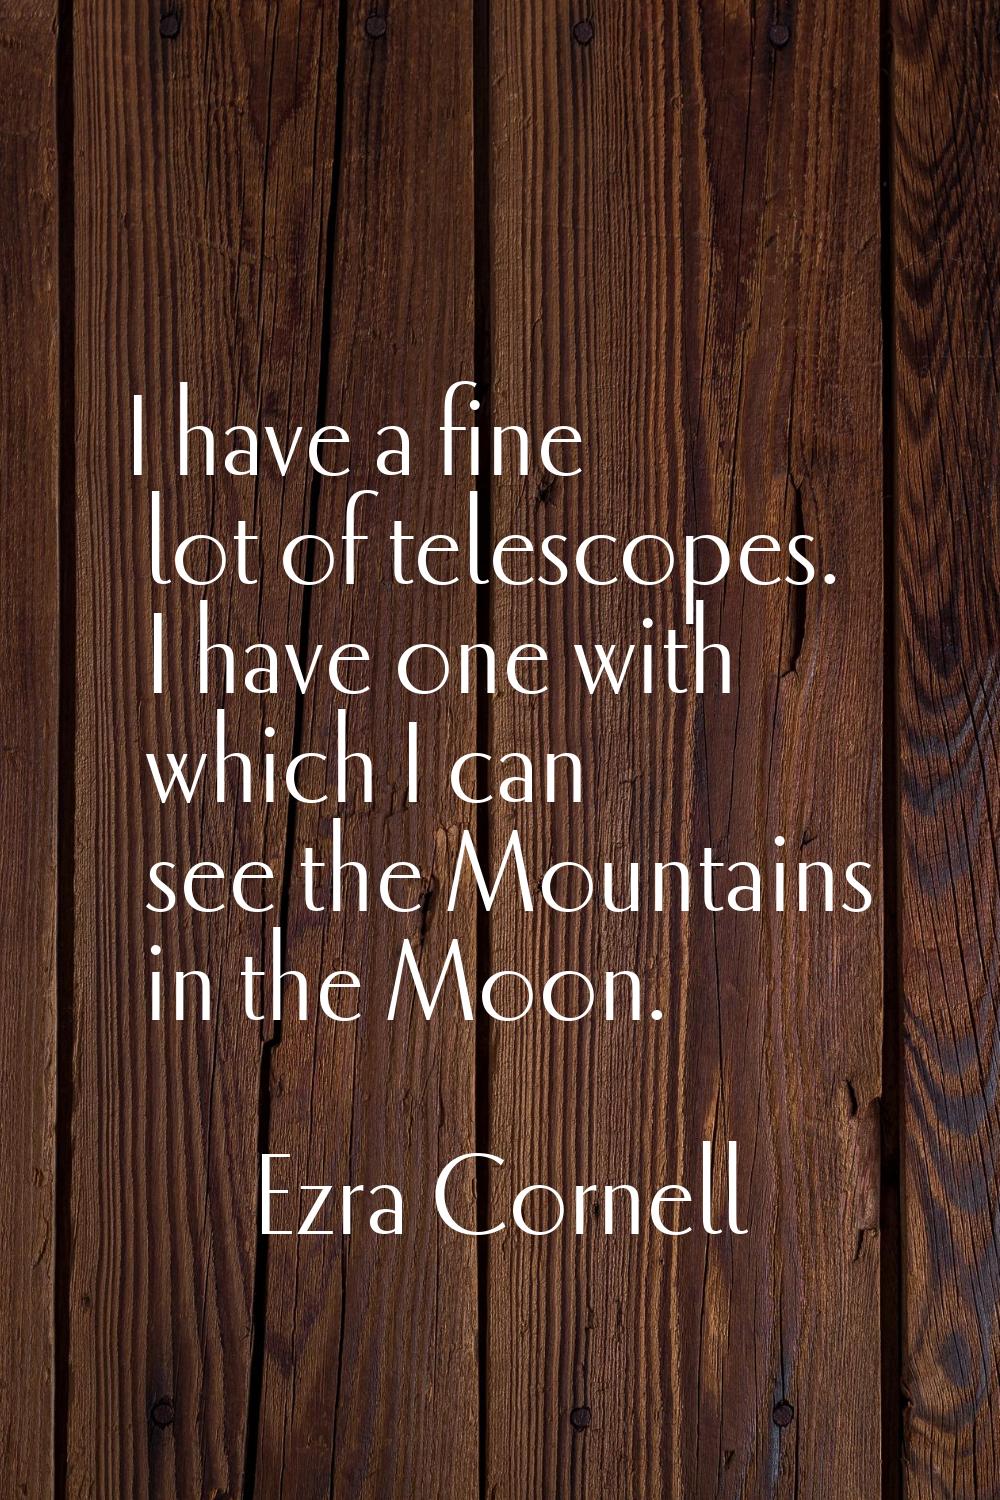 I have a fine lot of telescopes. I have one with which I can see the Mountains in the Moon.